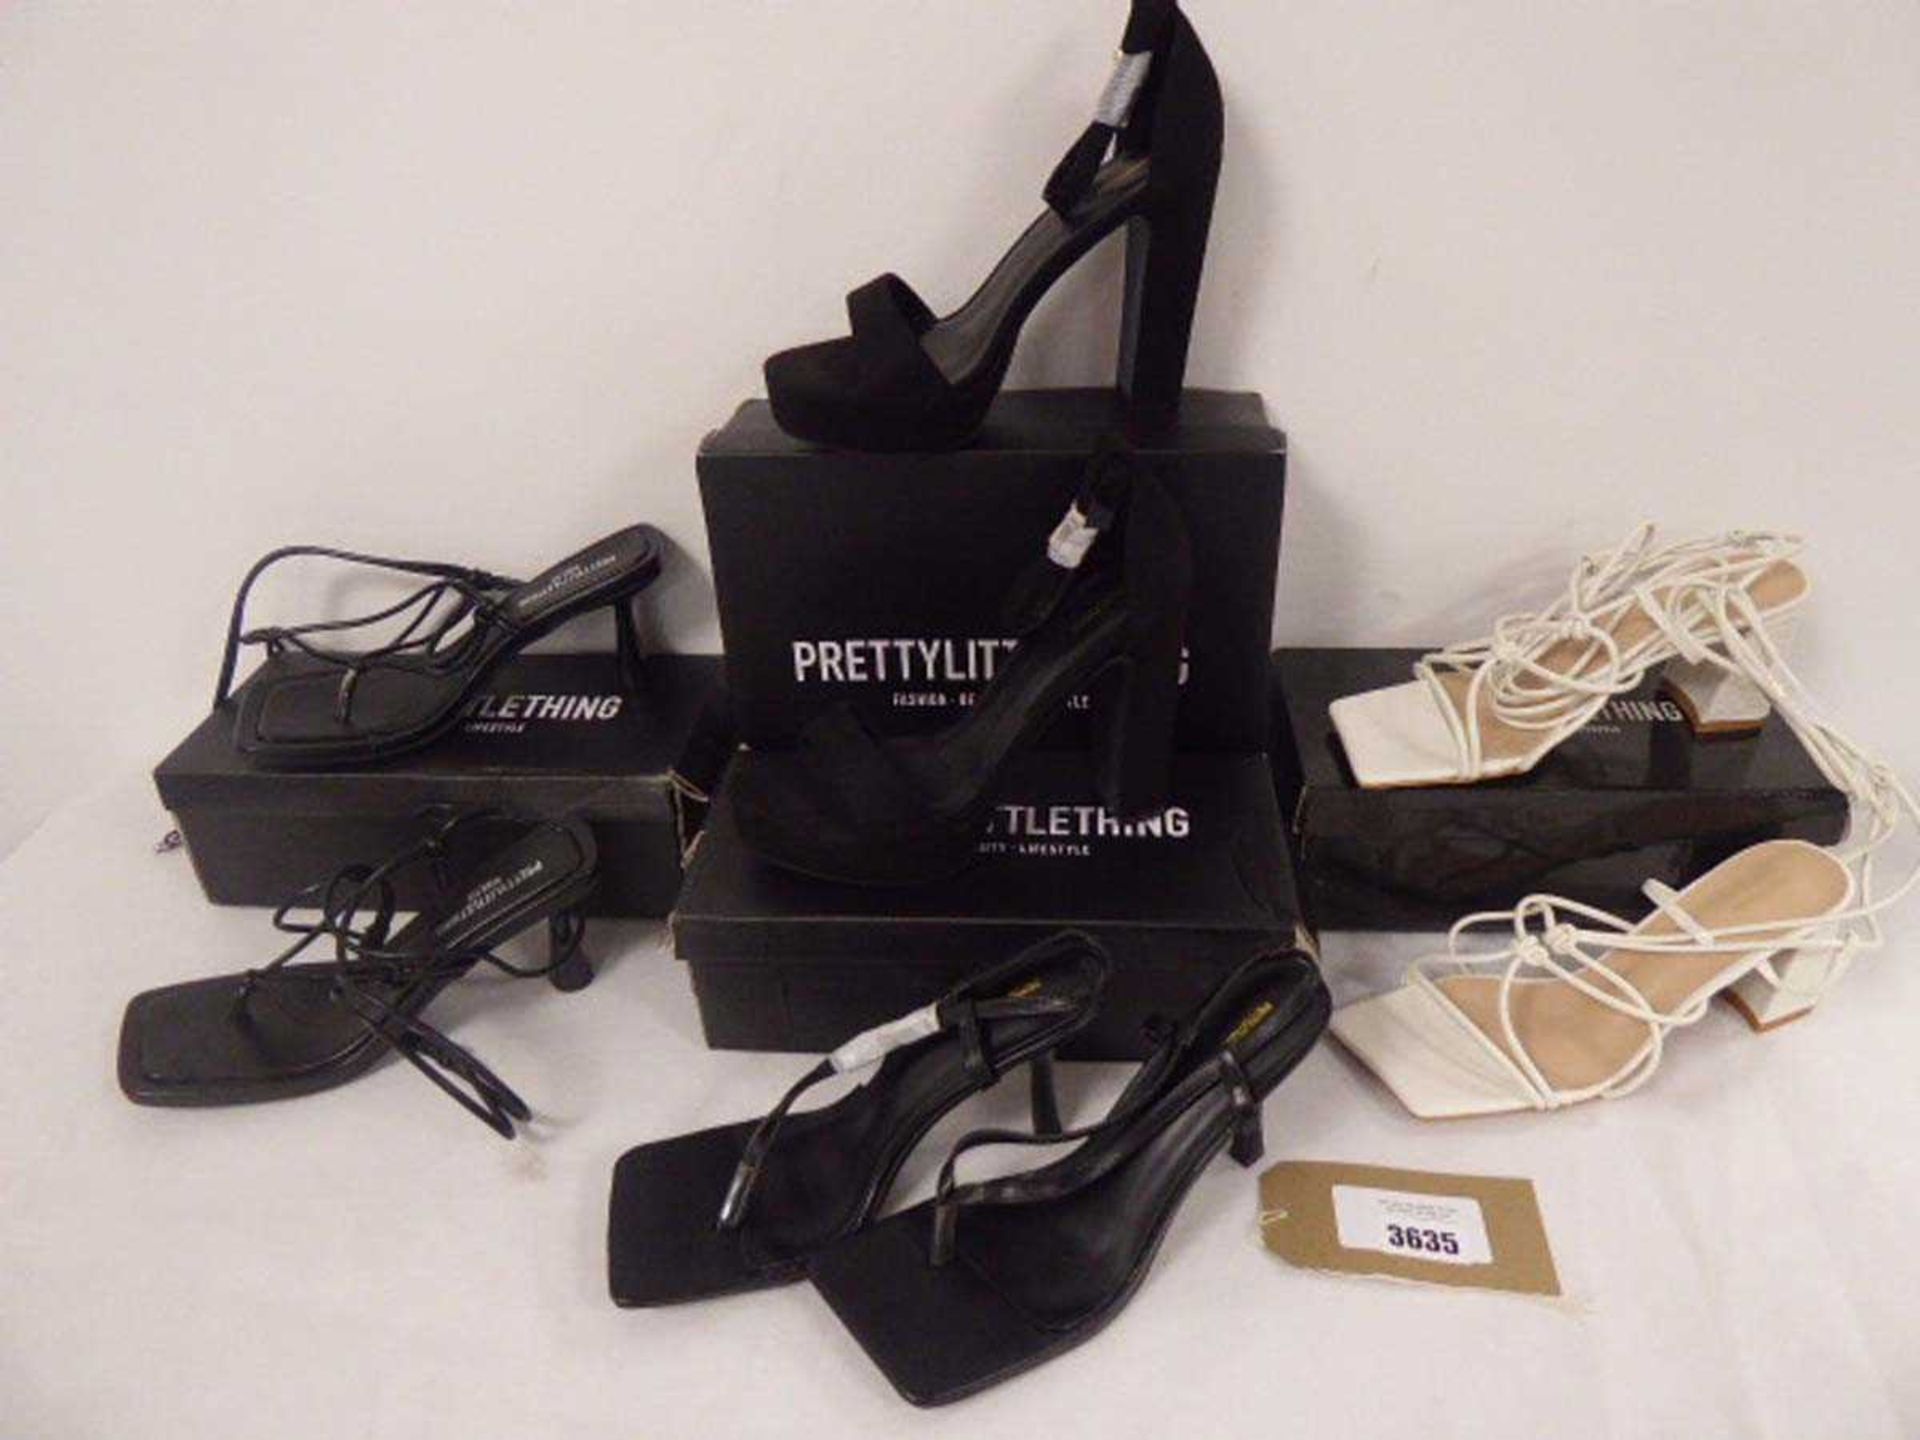 +VAT 4 x pairs of Pretty Little Thing heeled sandals in various colours, sizes & styles (boxed)